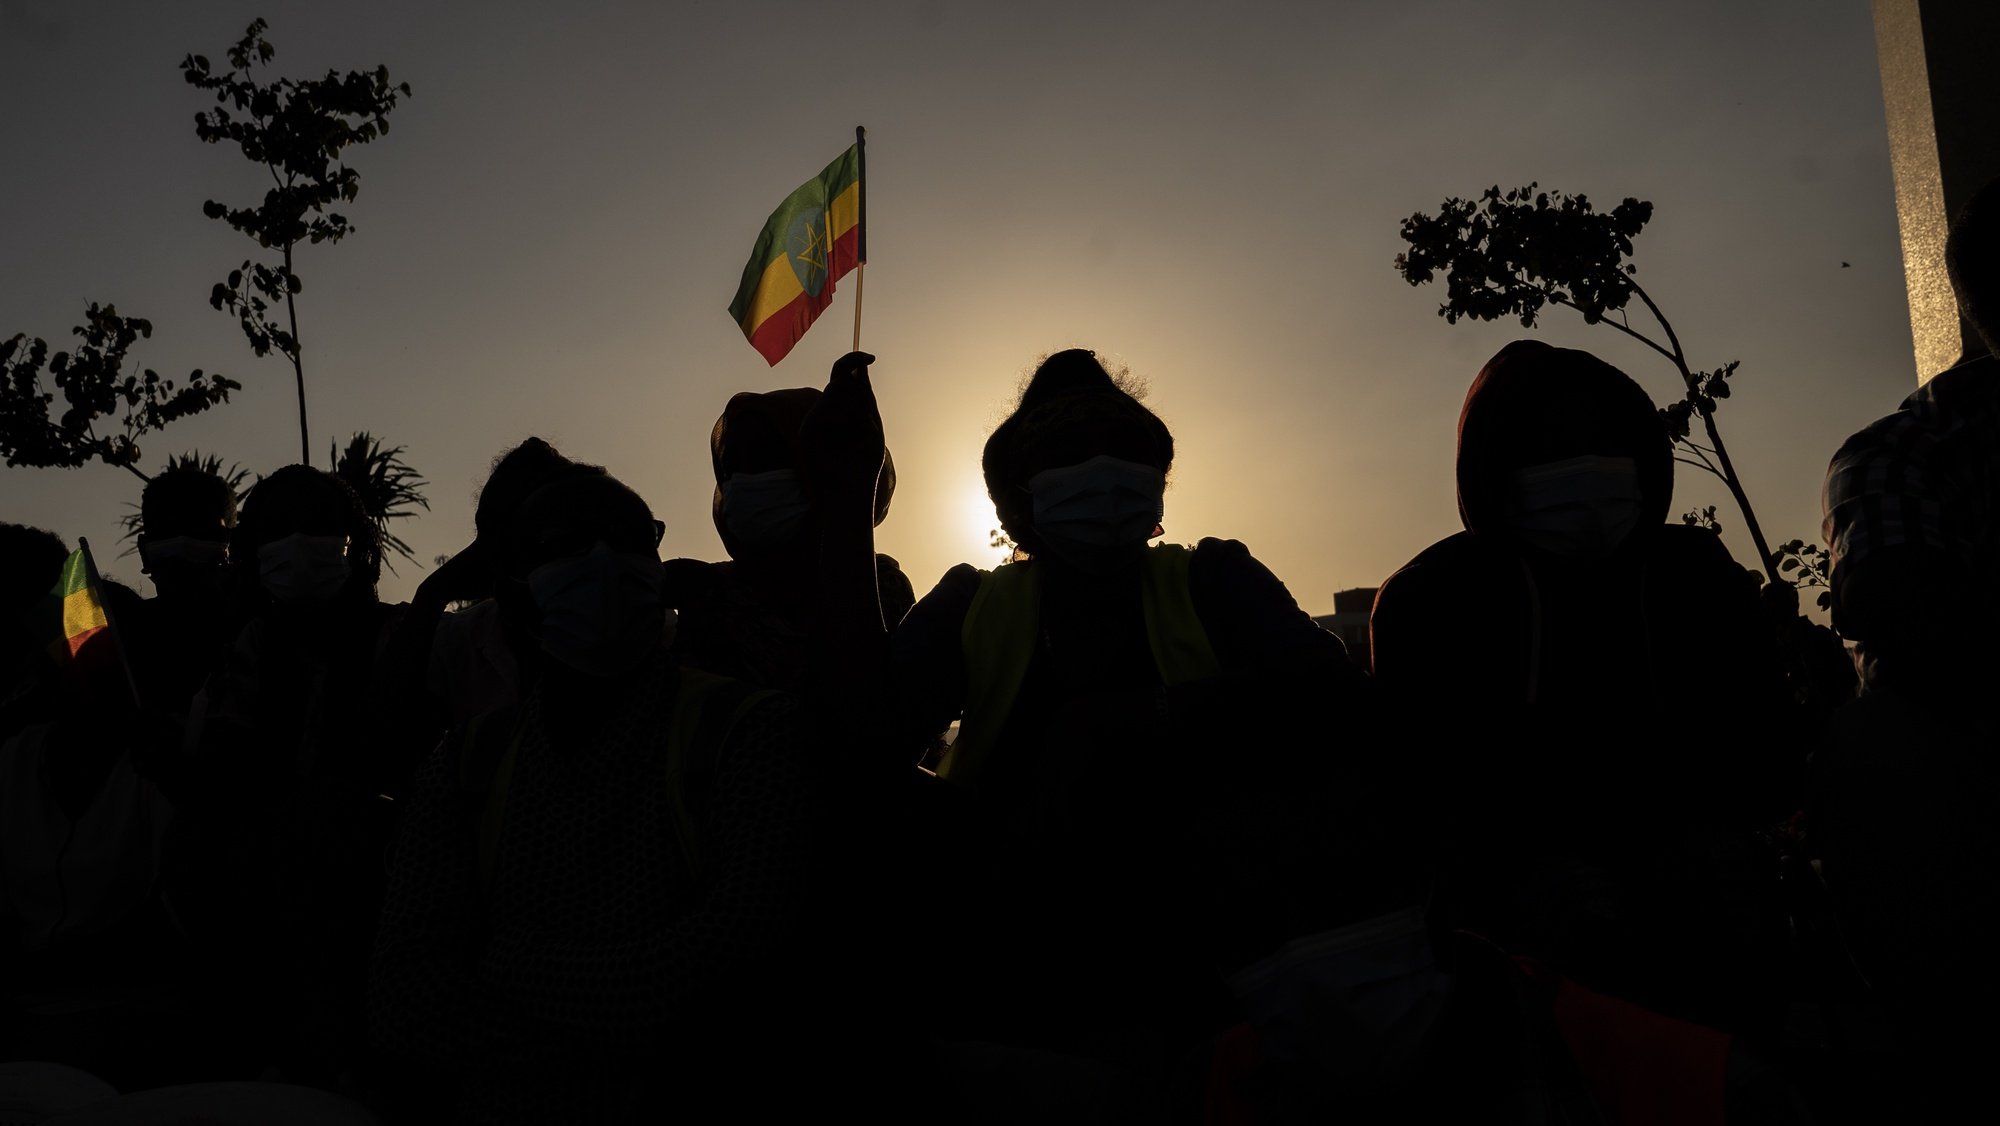 epa09561653 Ethiopians gather for an event marking the one year anniversary of the war in Tigray in the capital Addis Ababa, Ethiopia, 03 November 2021. The Tigray Peoples Liberation Front (TPLF) allegedly attacked an Ethiopian National Defense Force (ENDF) camp on 03 November 2020 starting the war. According to a report released 03 November 2021 by the UN high commission for Human Rights, war crimes and other crimes against humanity have been conducted by both sides in the year long bloody civil war. A nationwide state of emergency has been declared in Ethiopia following advances south through the Amhara region towards the capital city Addis Ababa by the TPLF.  EPA/STR